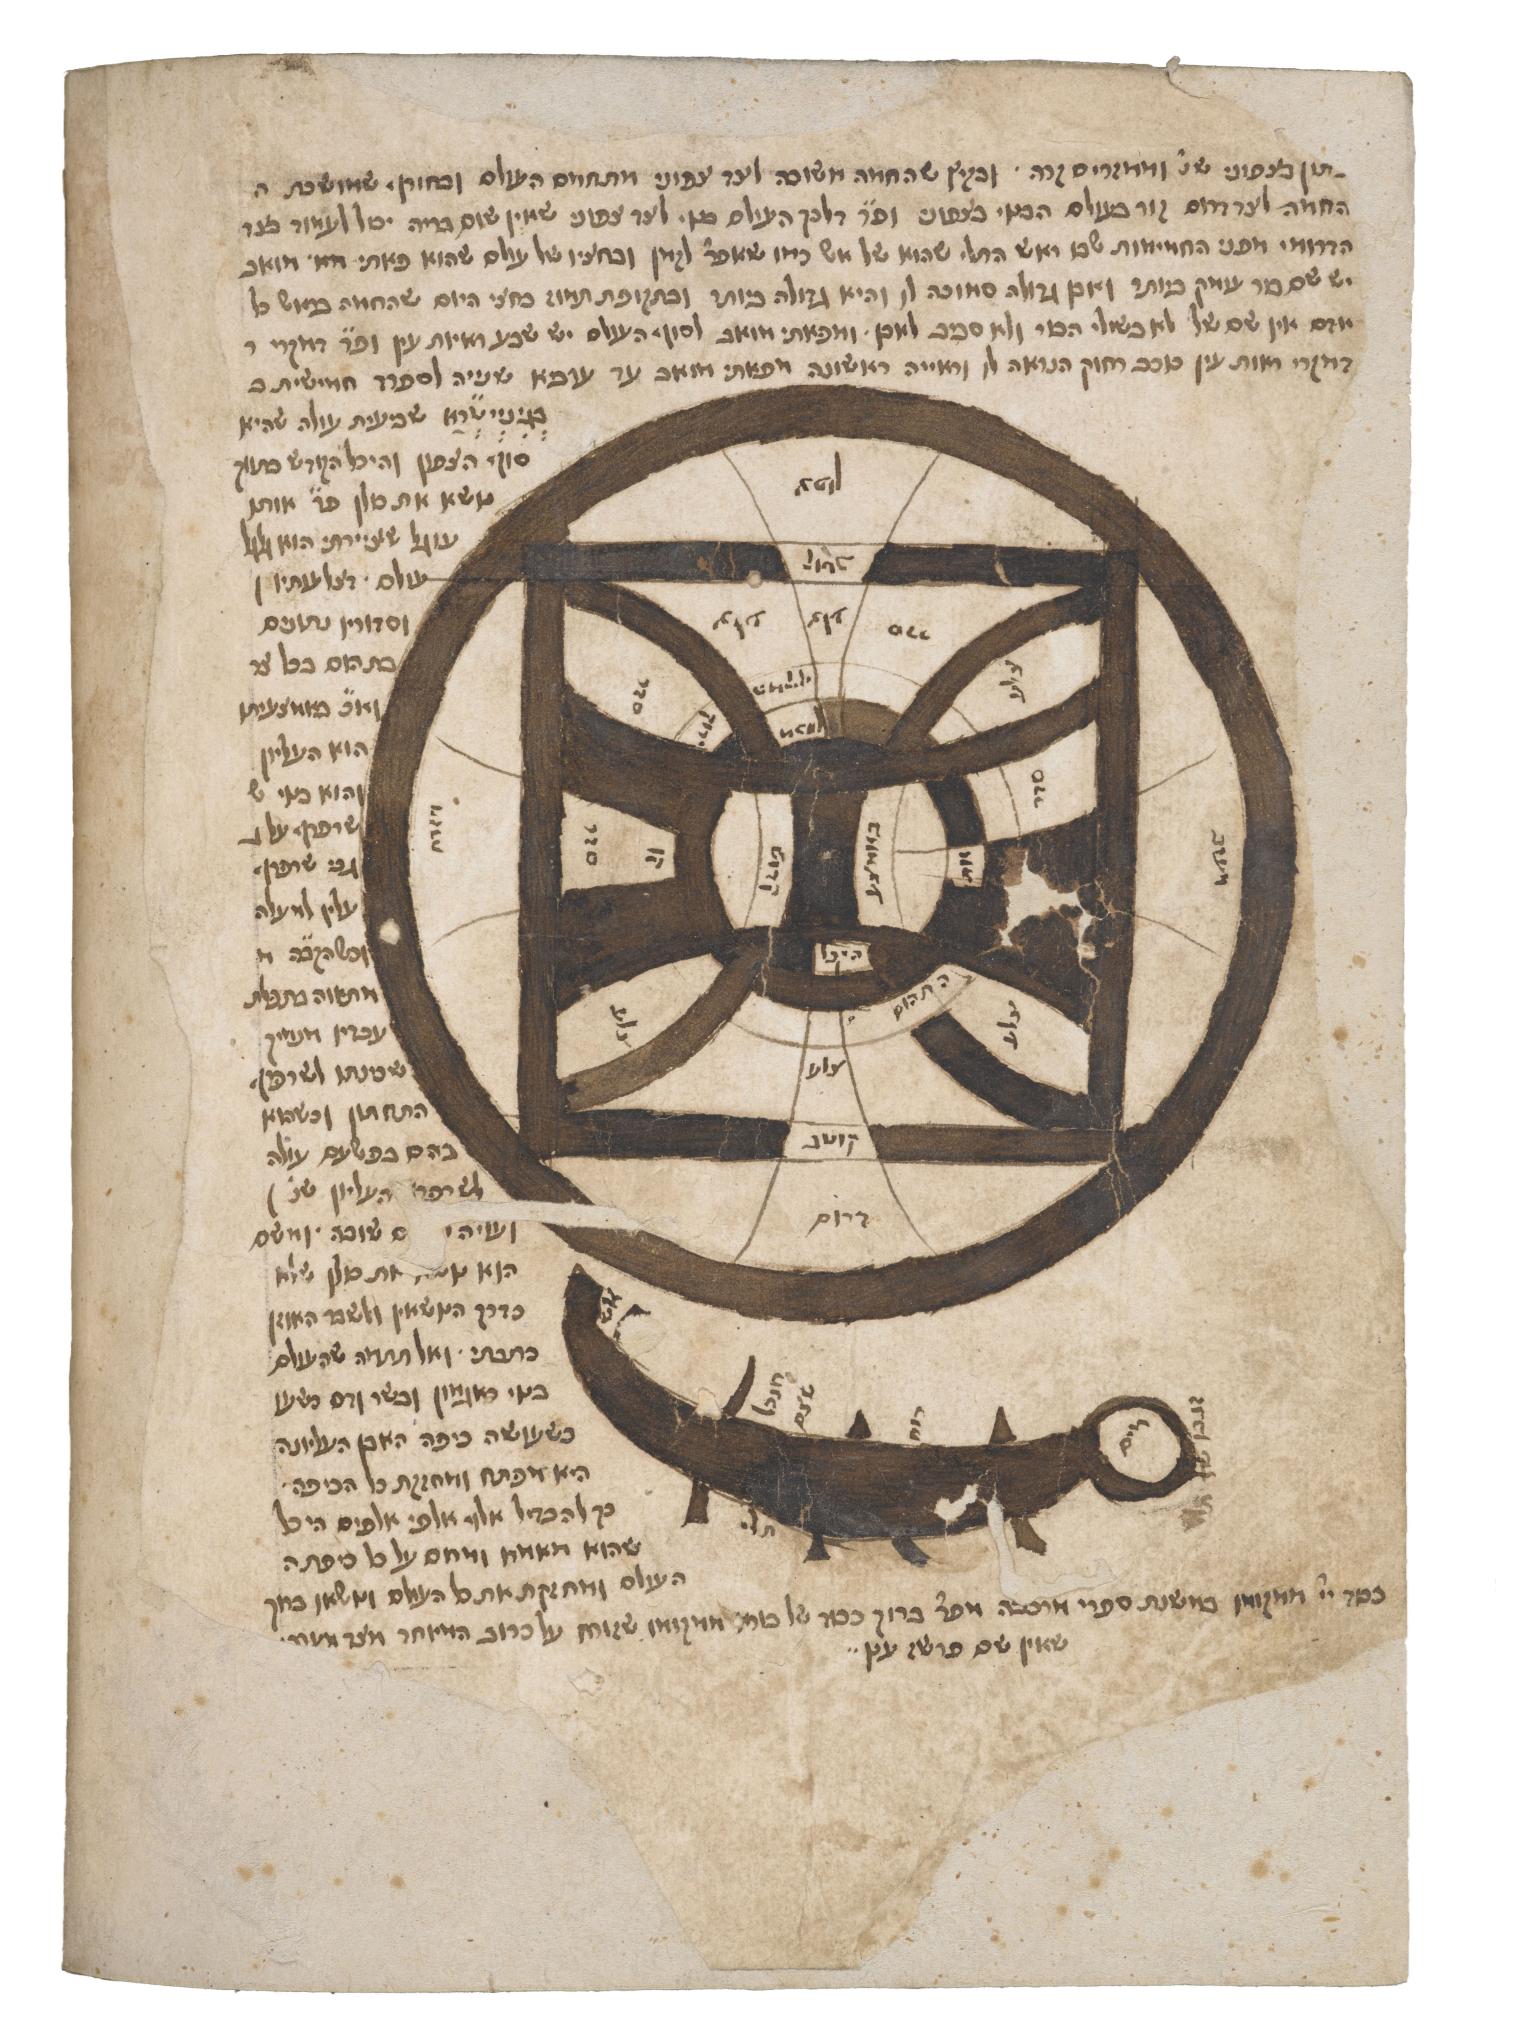 Manuscript page of Hebrew text with diagram in the center of a circle with circumscribed square, half circles, and thick lines, as well as a thick curved tail below.